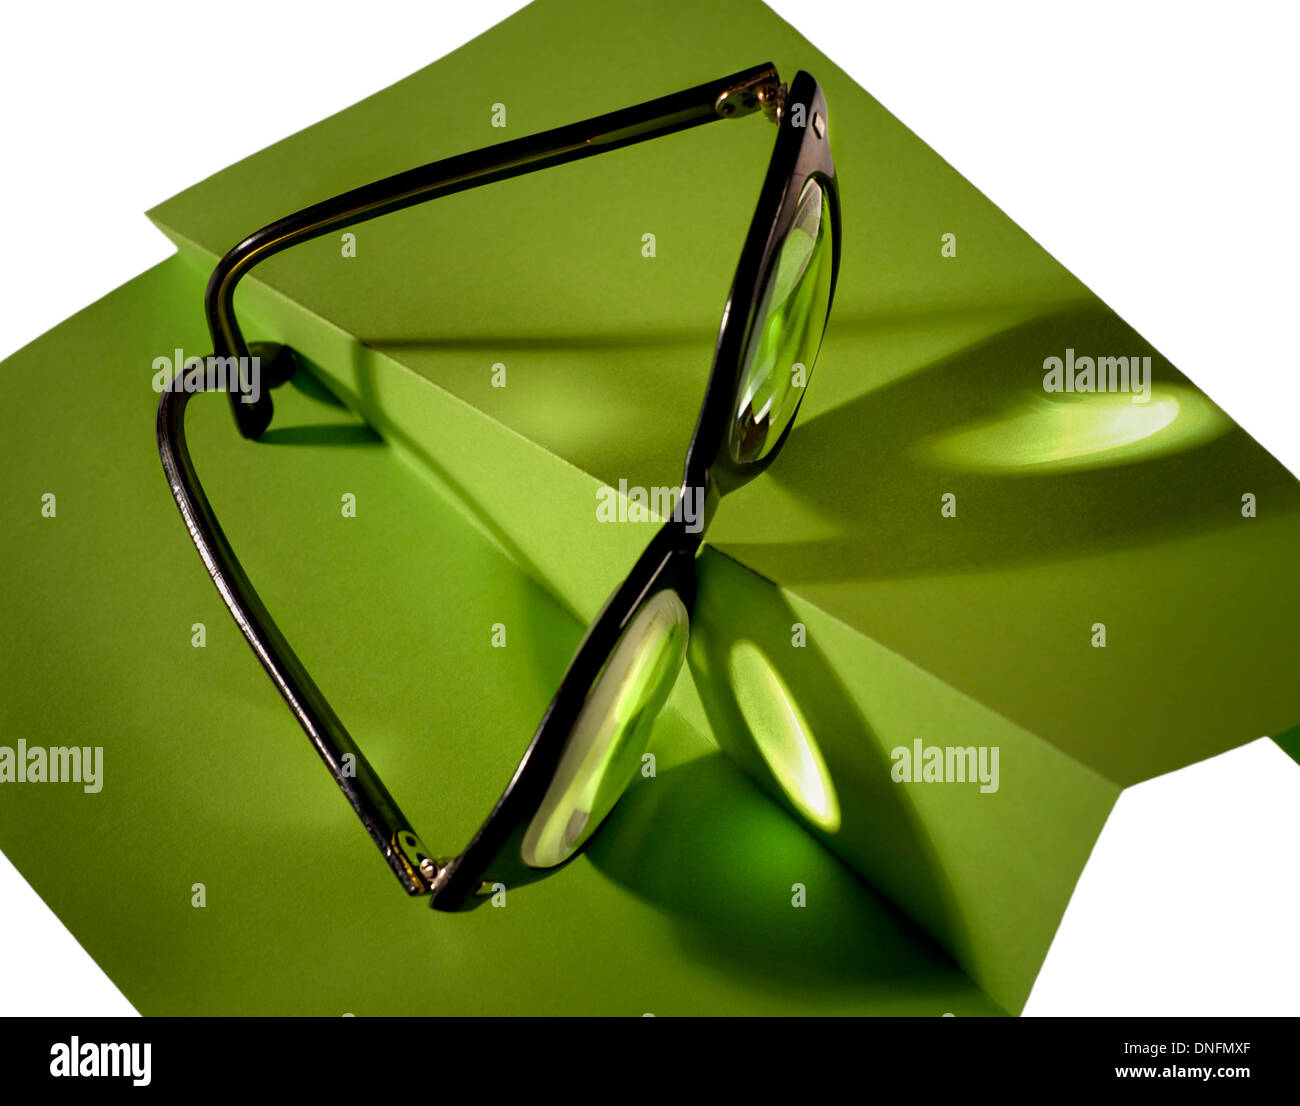 Light reflection through high diopter retro glasses Stock Photo